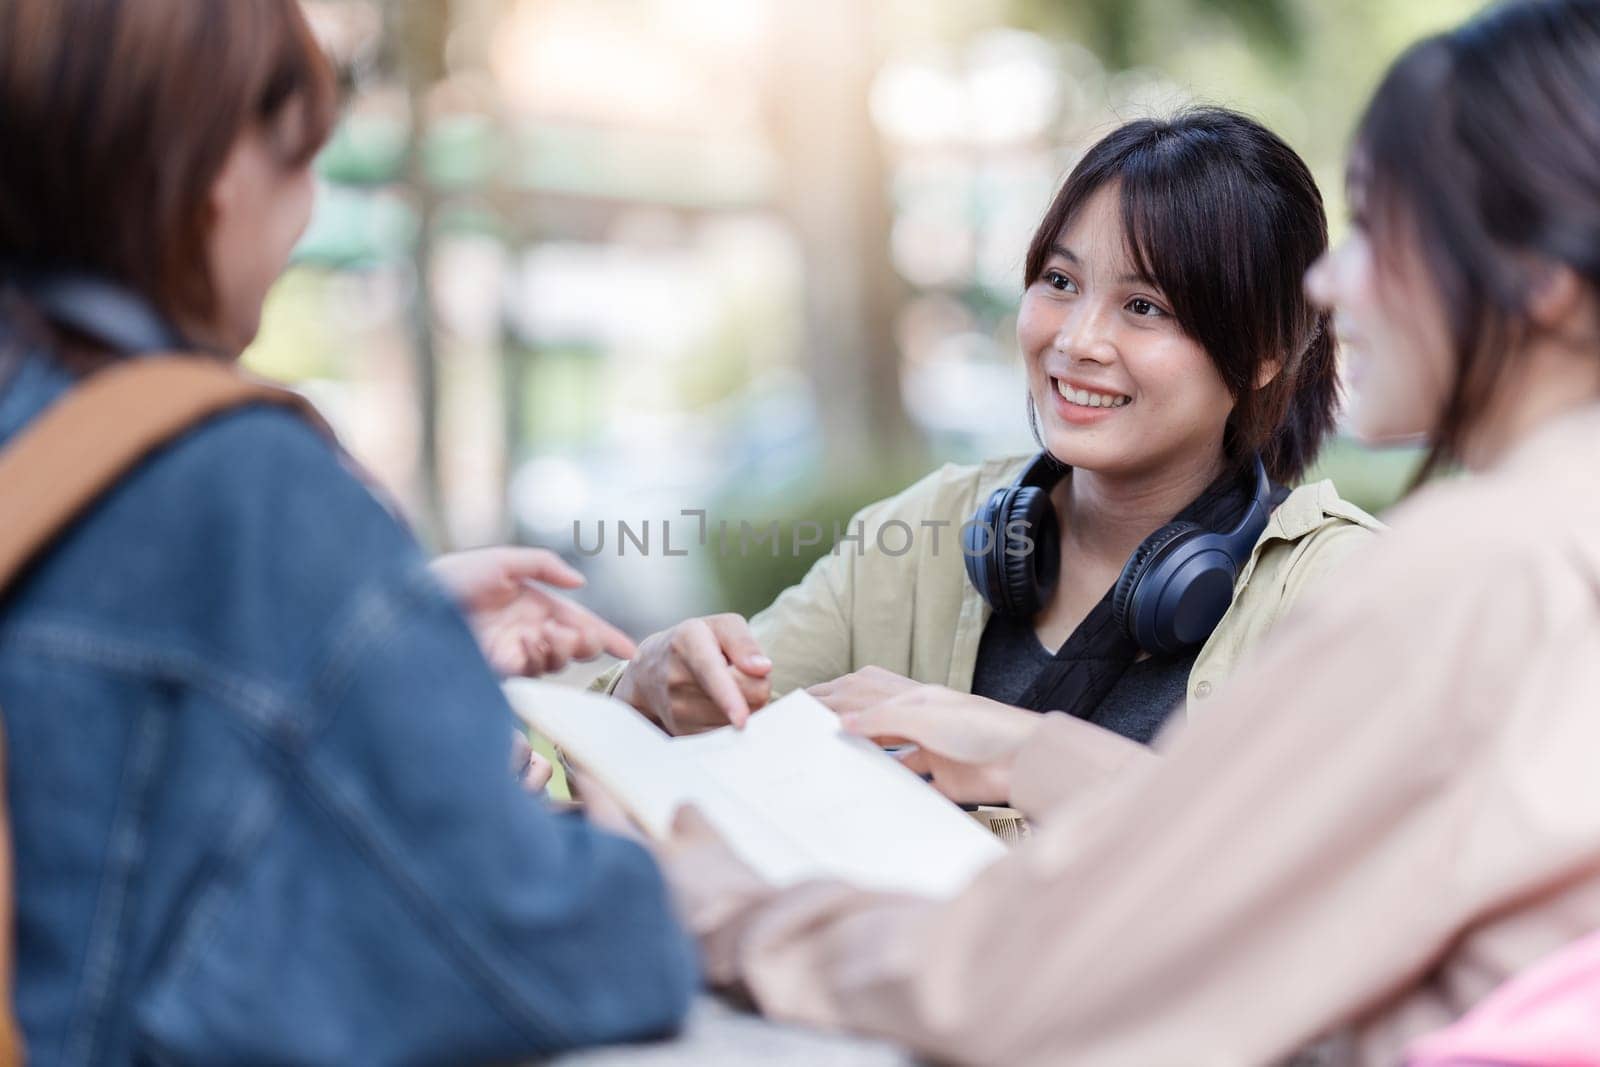 Group of young Asian college students sitting on a bench in a campus relaxation area, talking, sharing ideas, doing homework or tutoring for the exam together by itchaznong